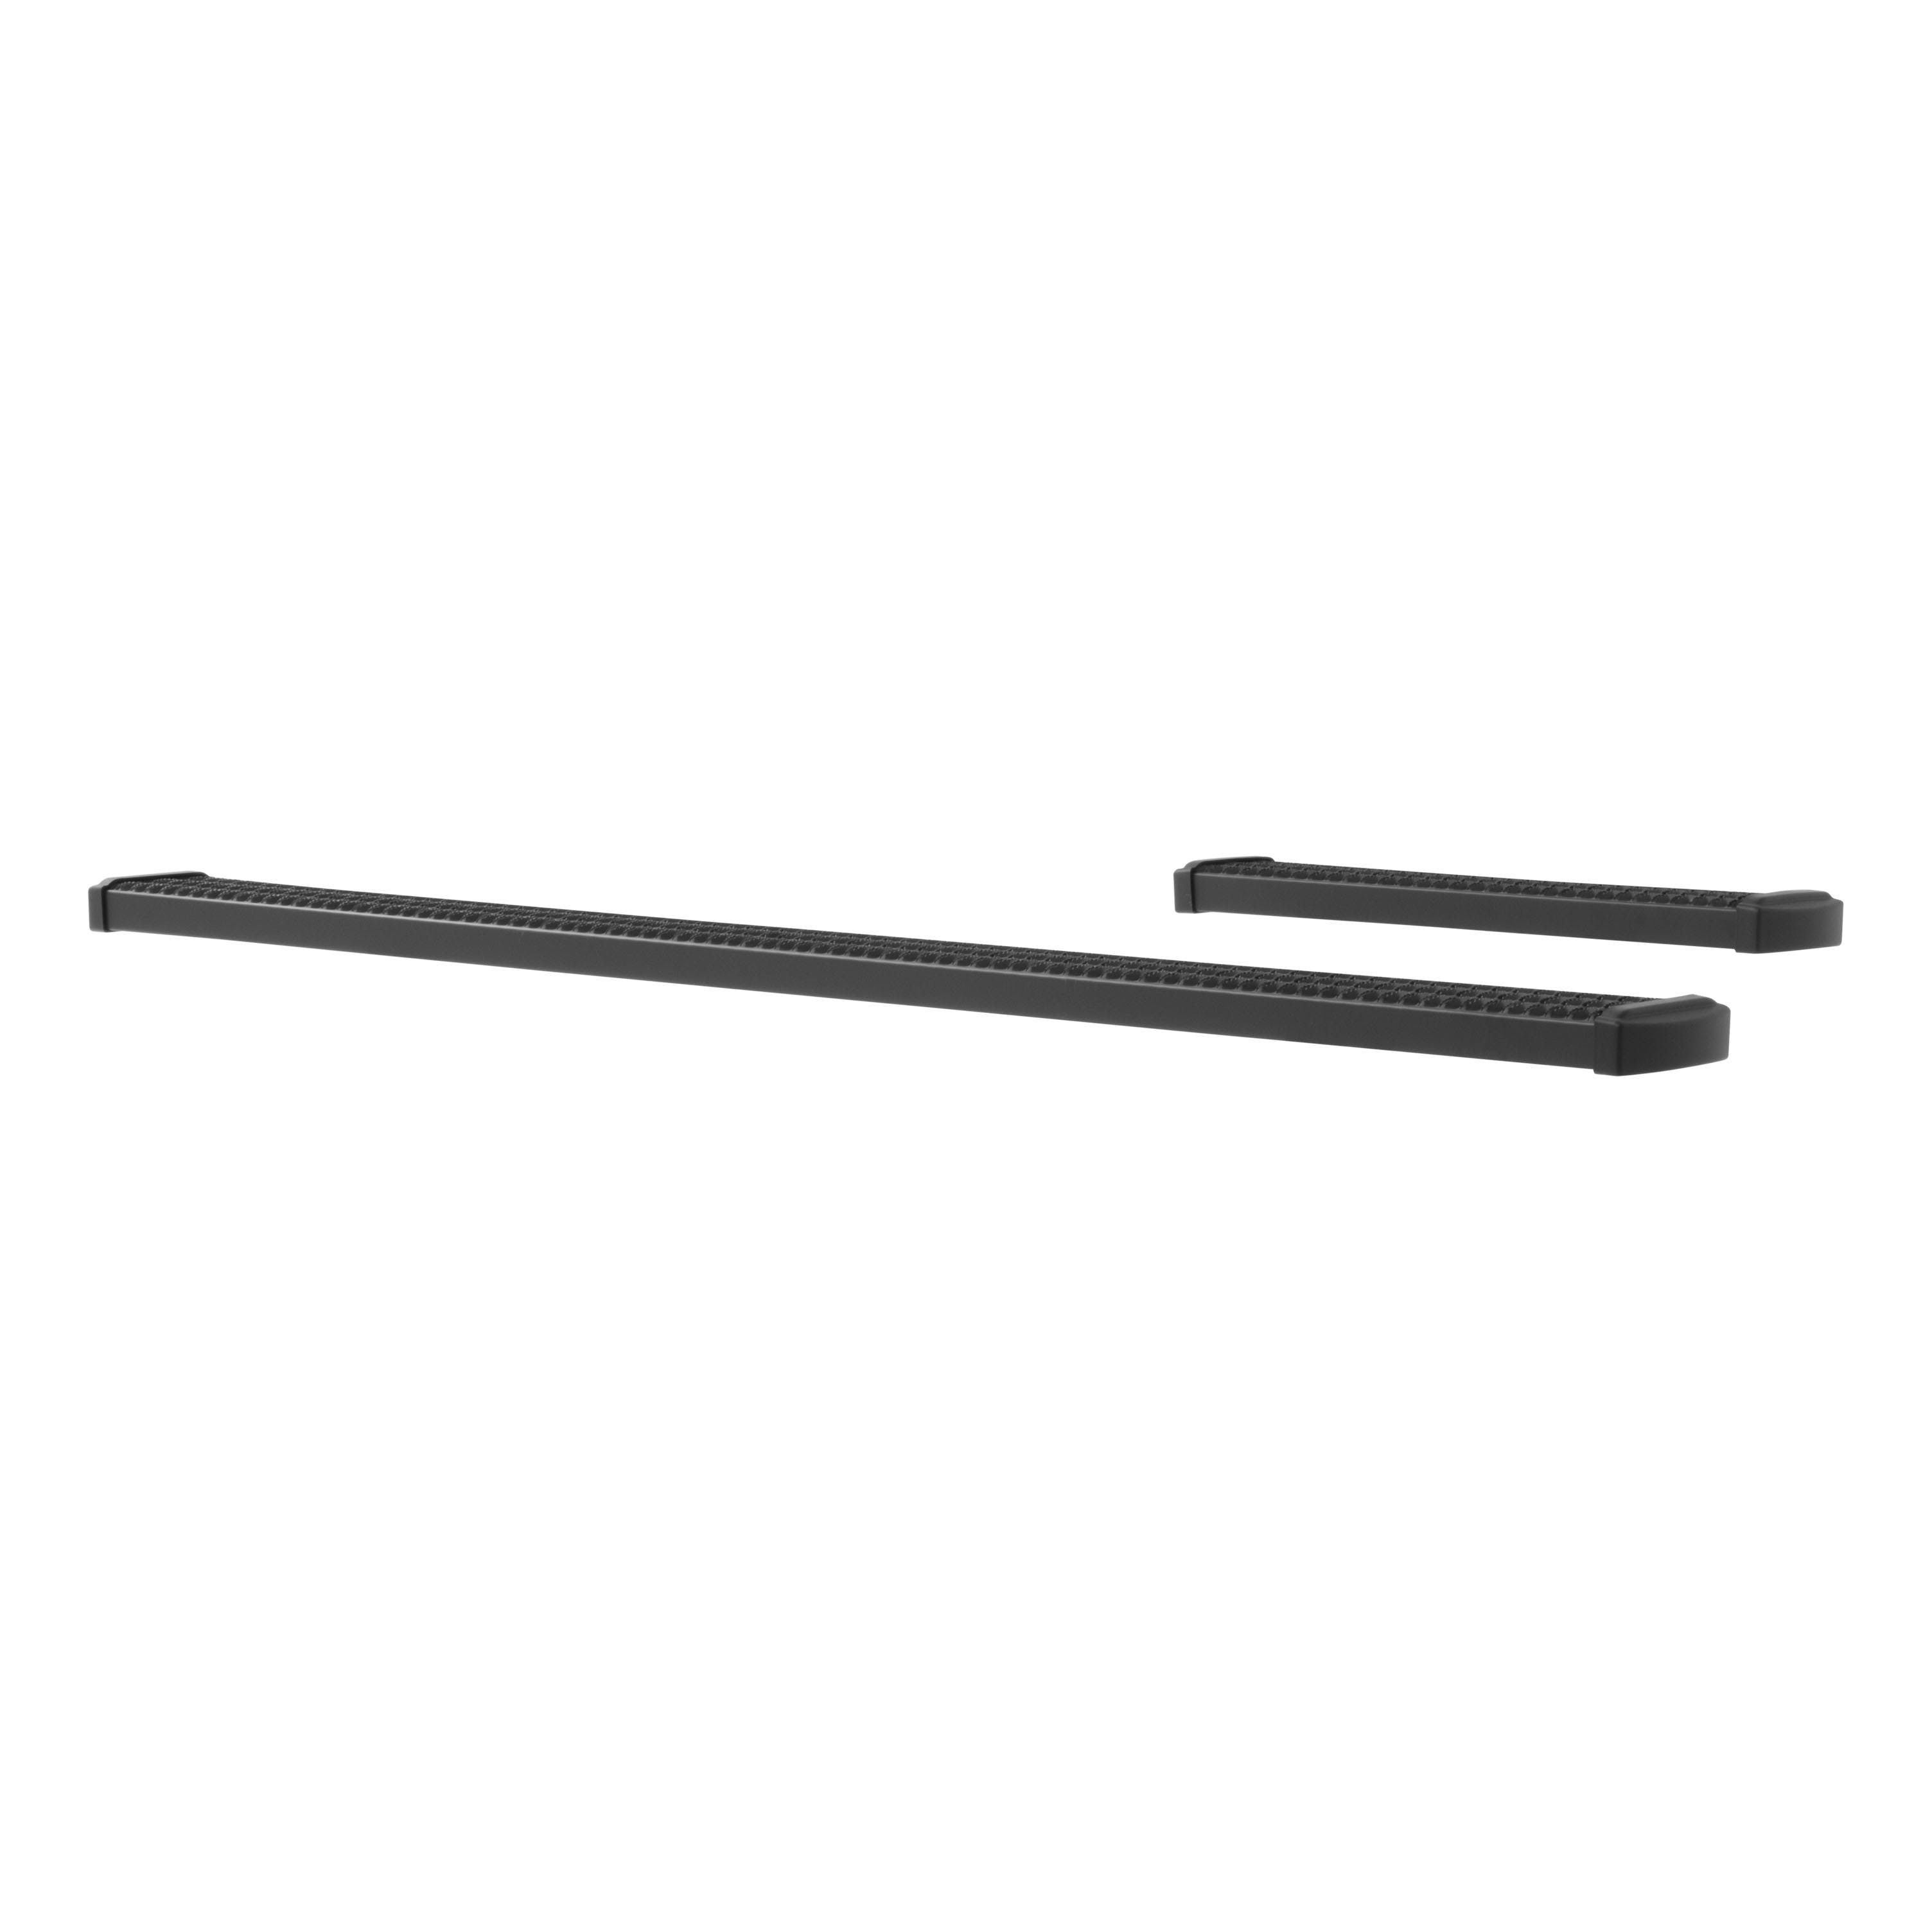 LUVERNE 415110-401347 Grip Step 7 inch Running Boards